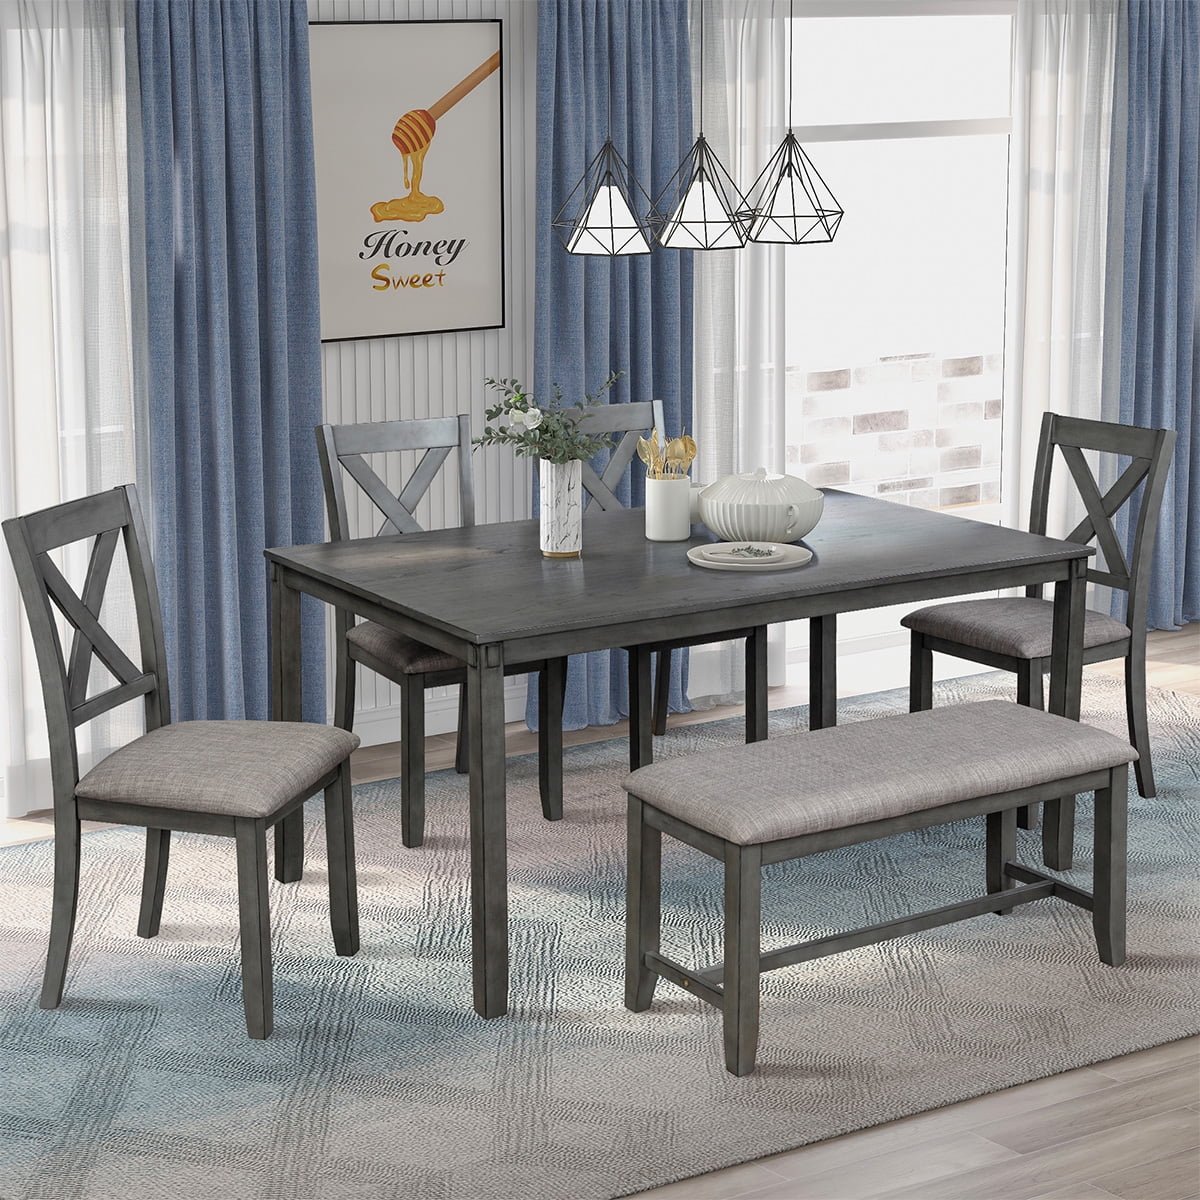 Sentern 6 Piece Dining Table Set With, Dining Room Set With 4 Chairs And Bench